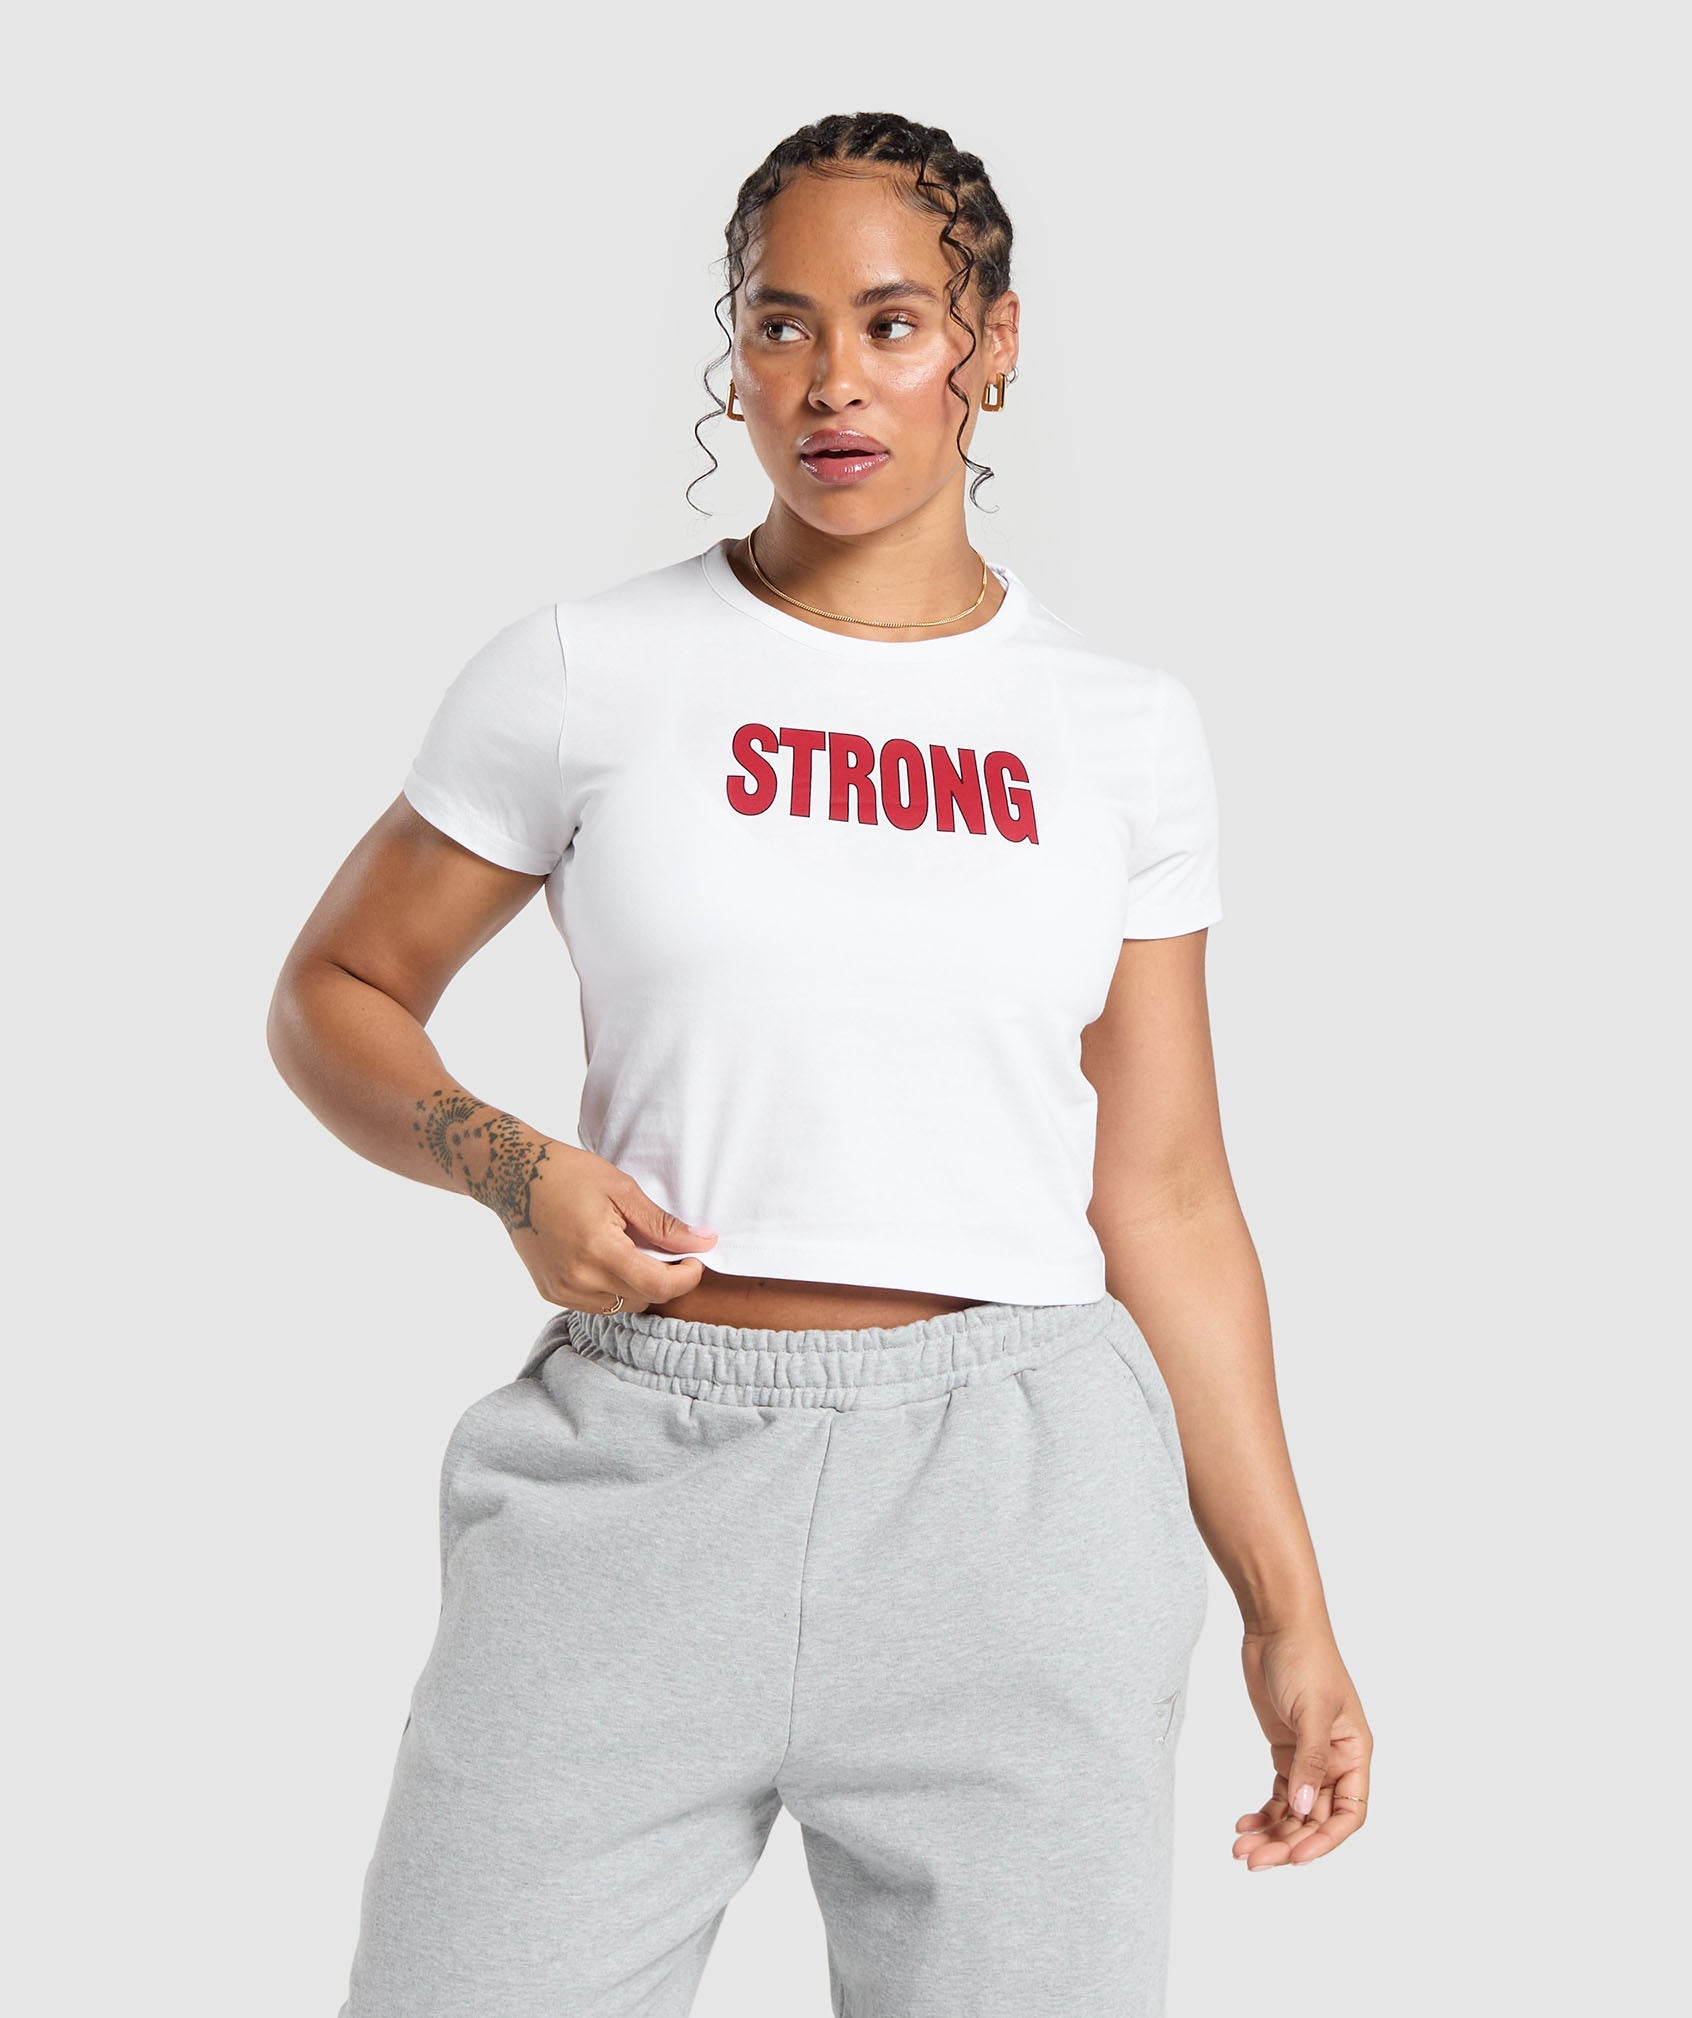 Strong Lifter Baby Tee